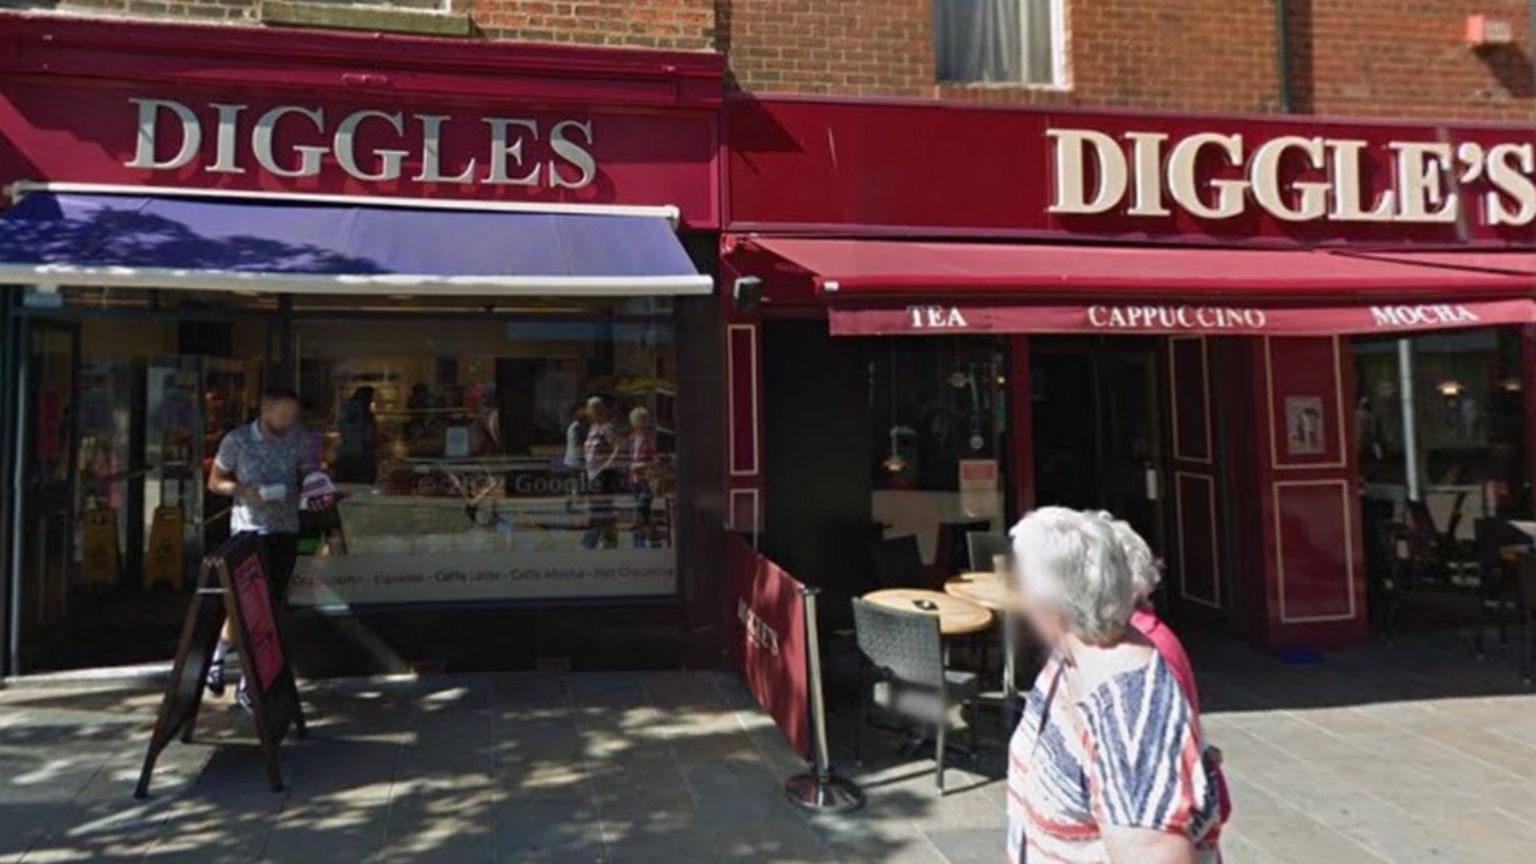 Diggle's cafe in Barrow